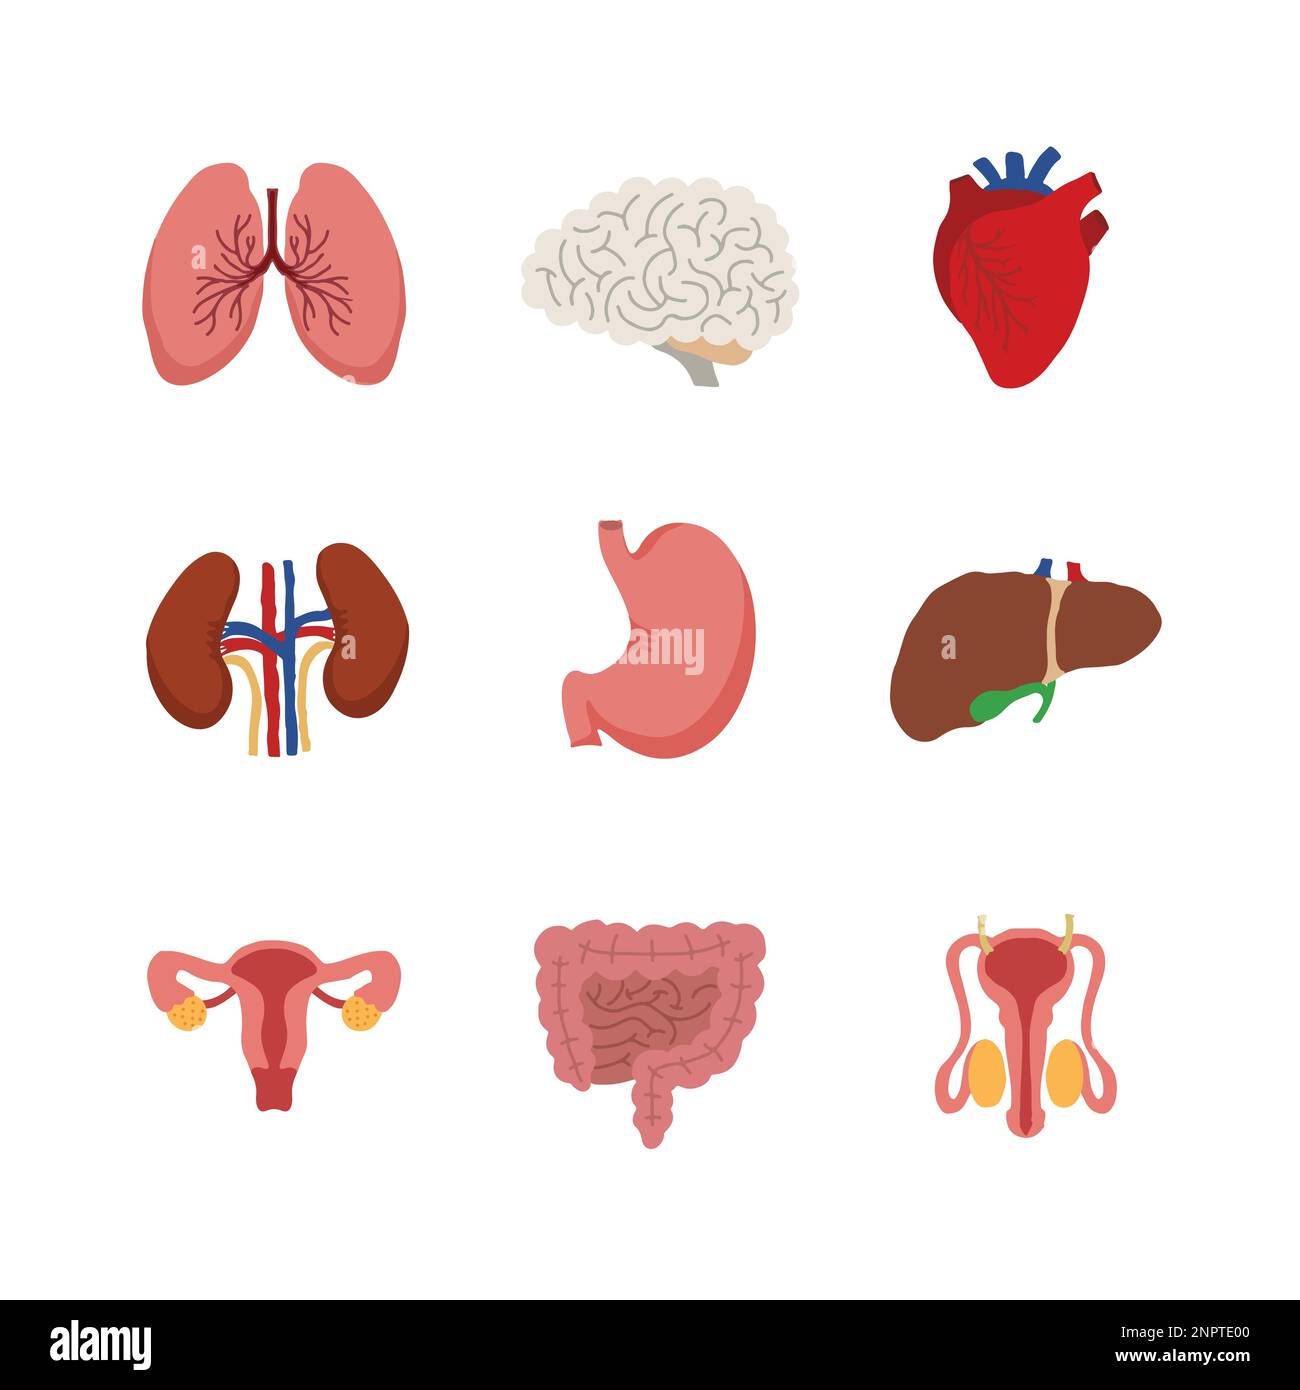 Internal organs. Human body anatomy organ icons, cartoon lungs and heart, urinary system and liver, reproductive function and brain, illustration Stock Vector